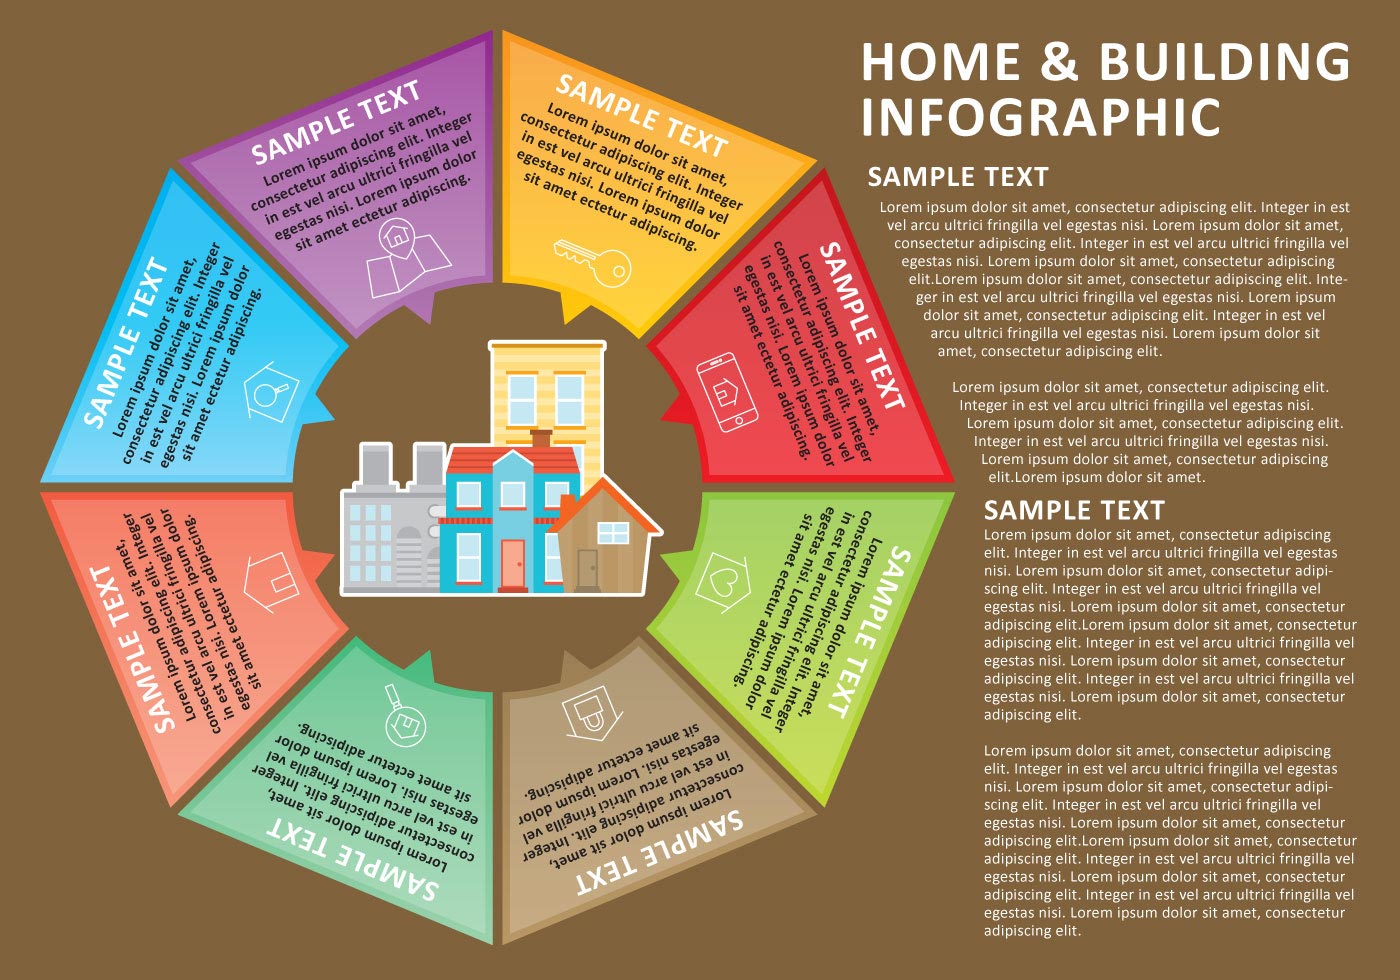 12 Steps to Build a Brand New Home | Infographic